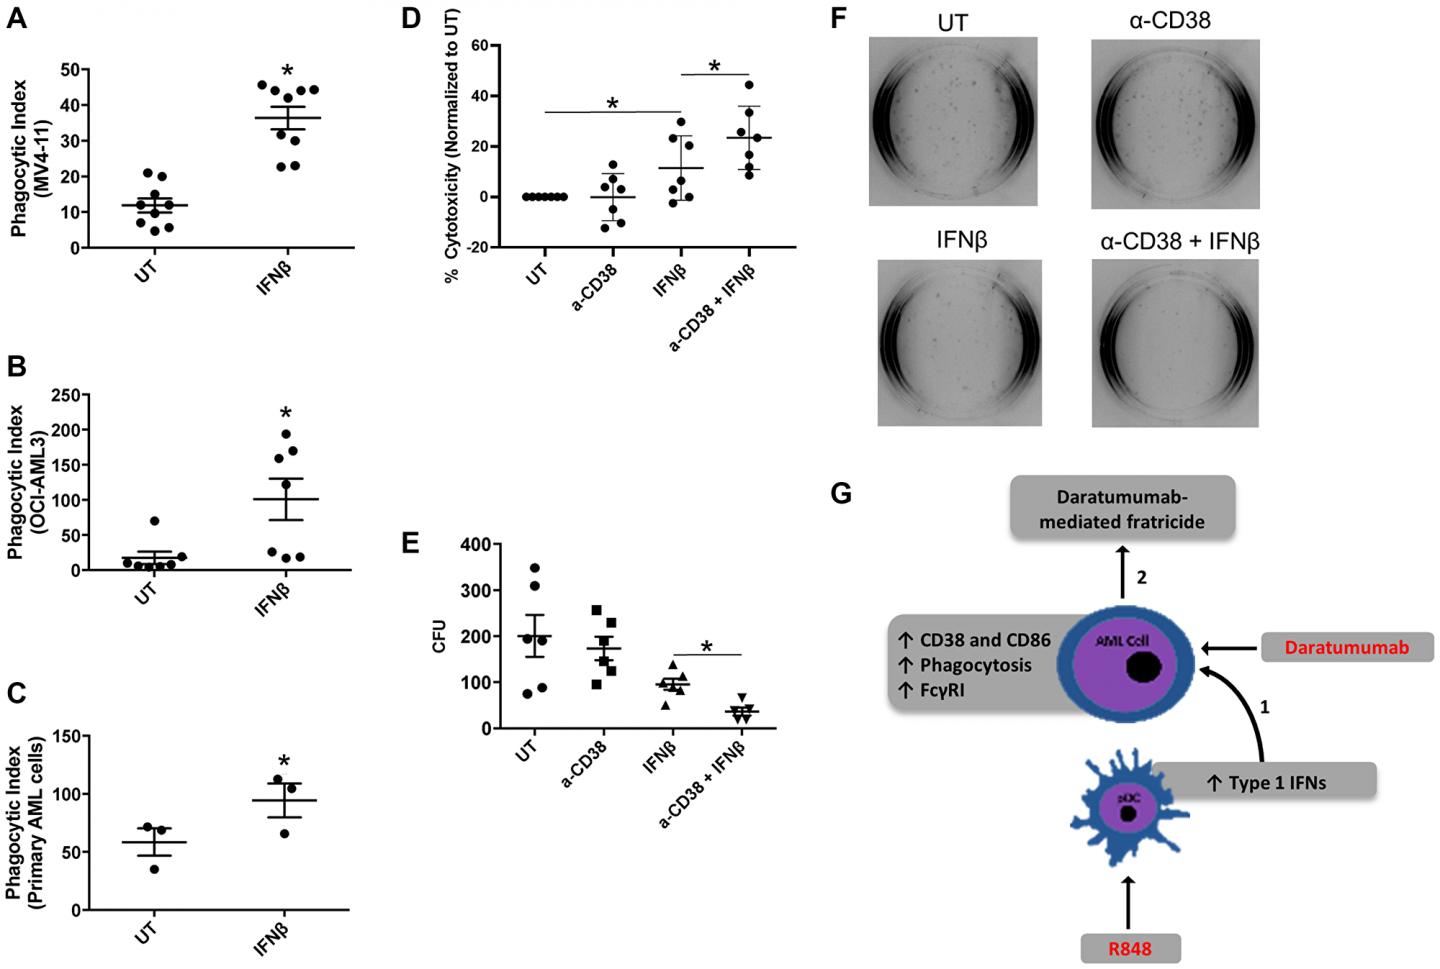 Oncotarget: Activation of plasmacytoid dendritic cells promotes AML-cell fratricide